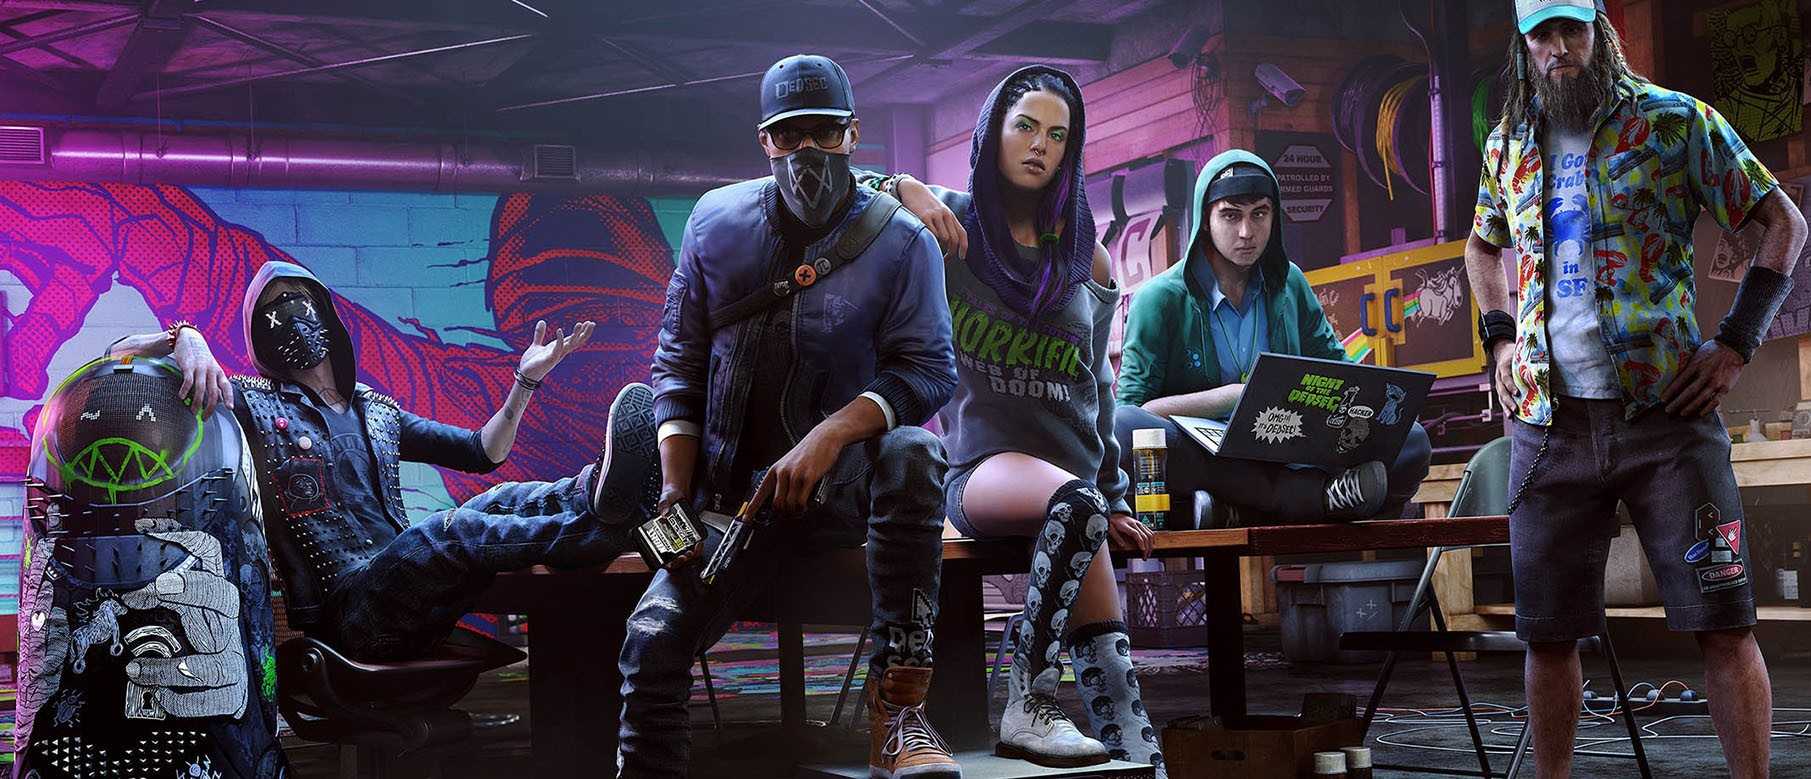 Watch dogs 2 steam deluxe фото 85